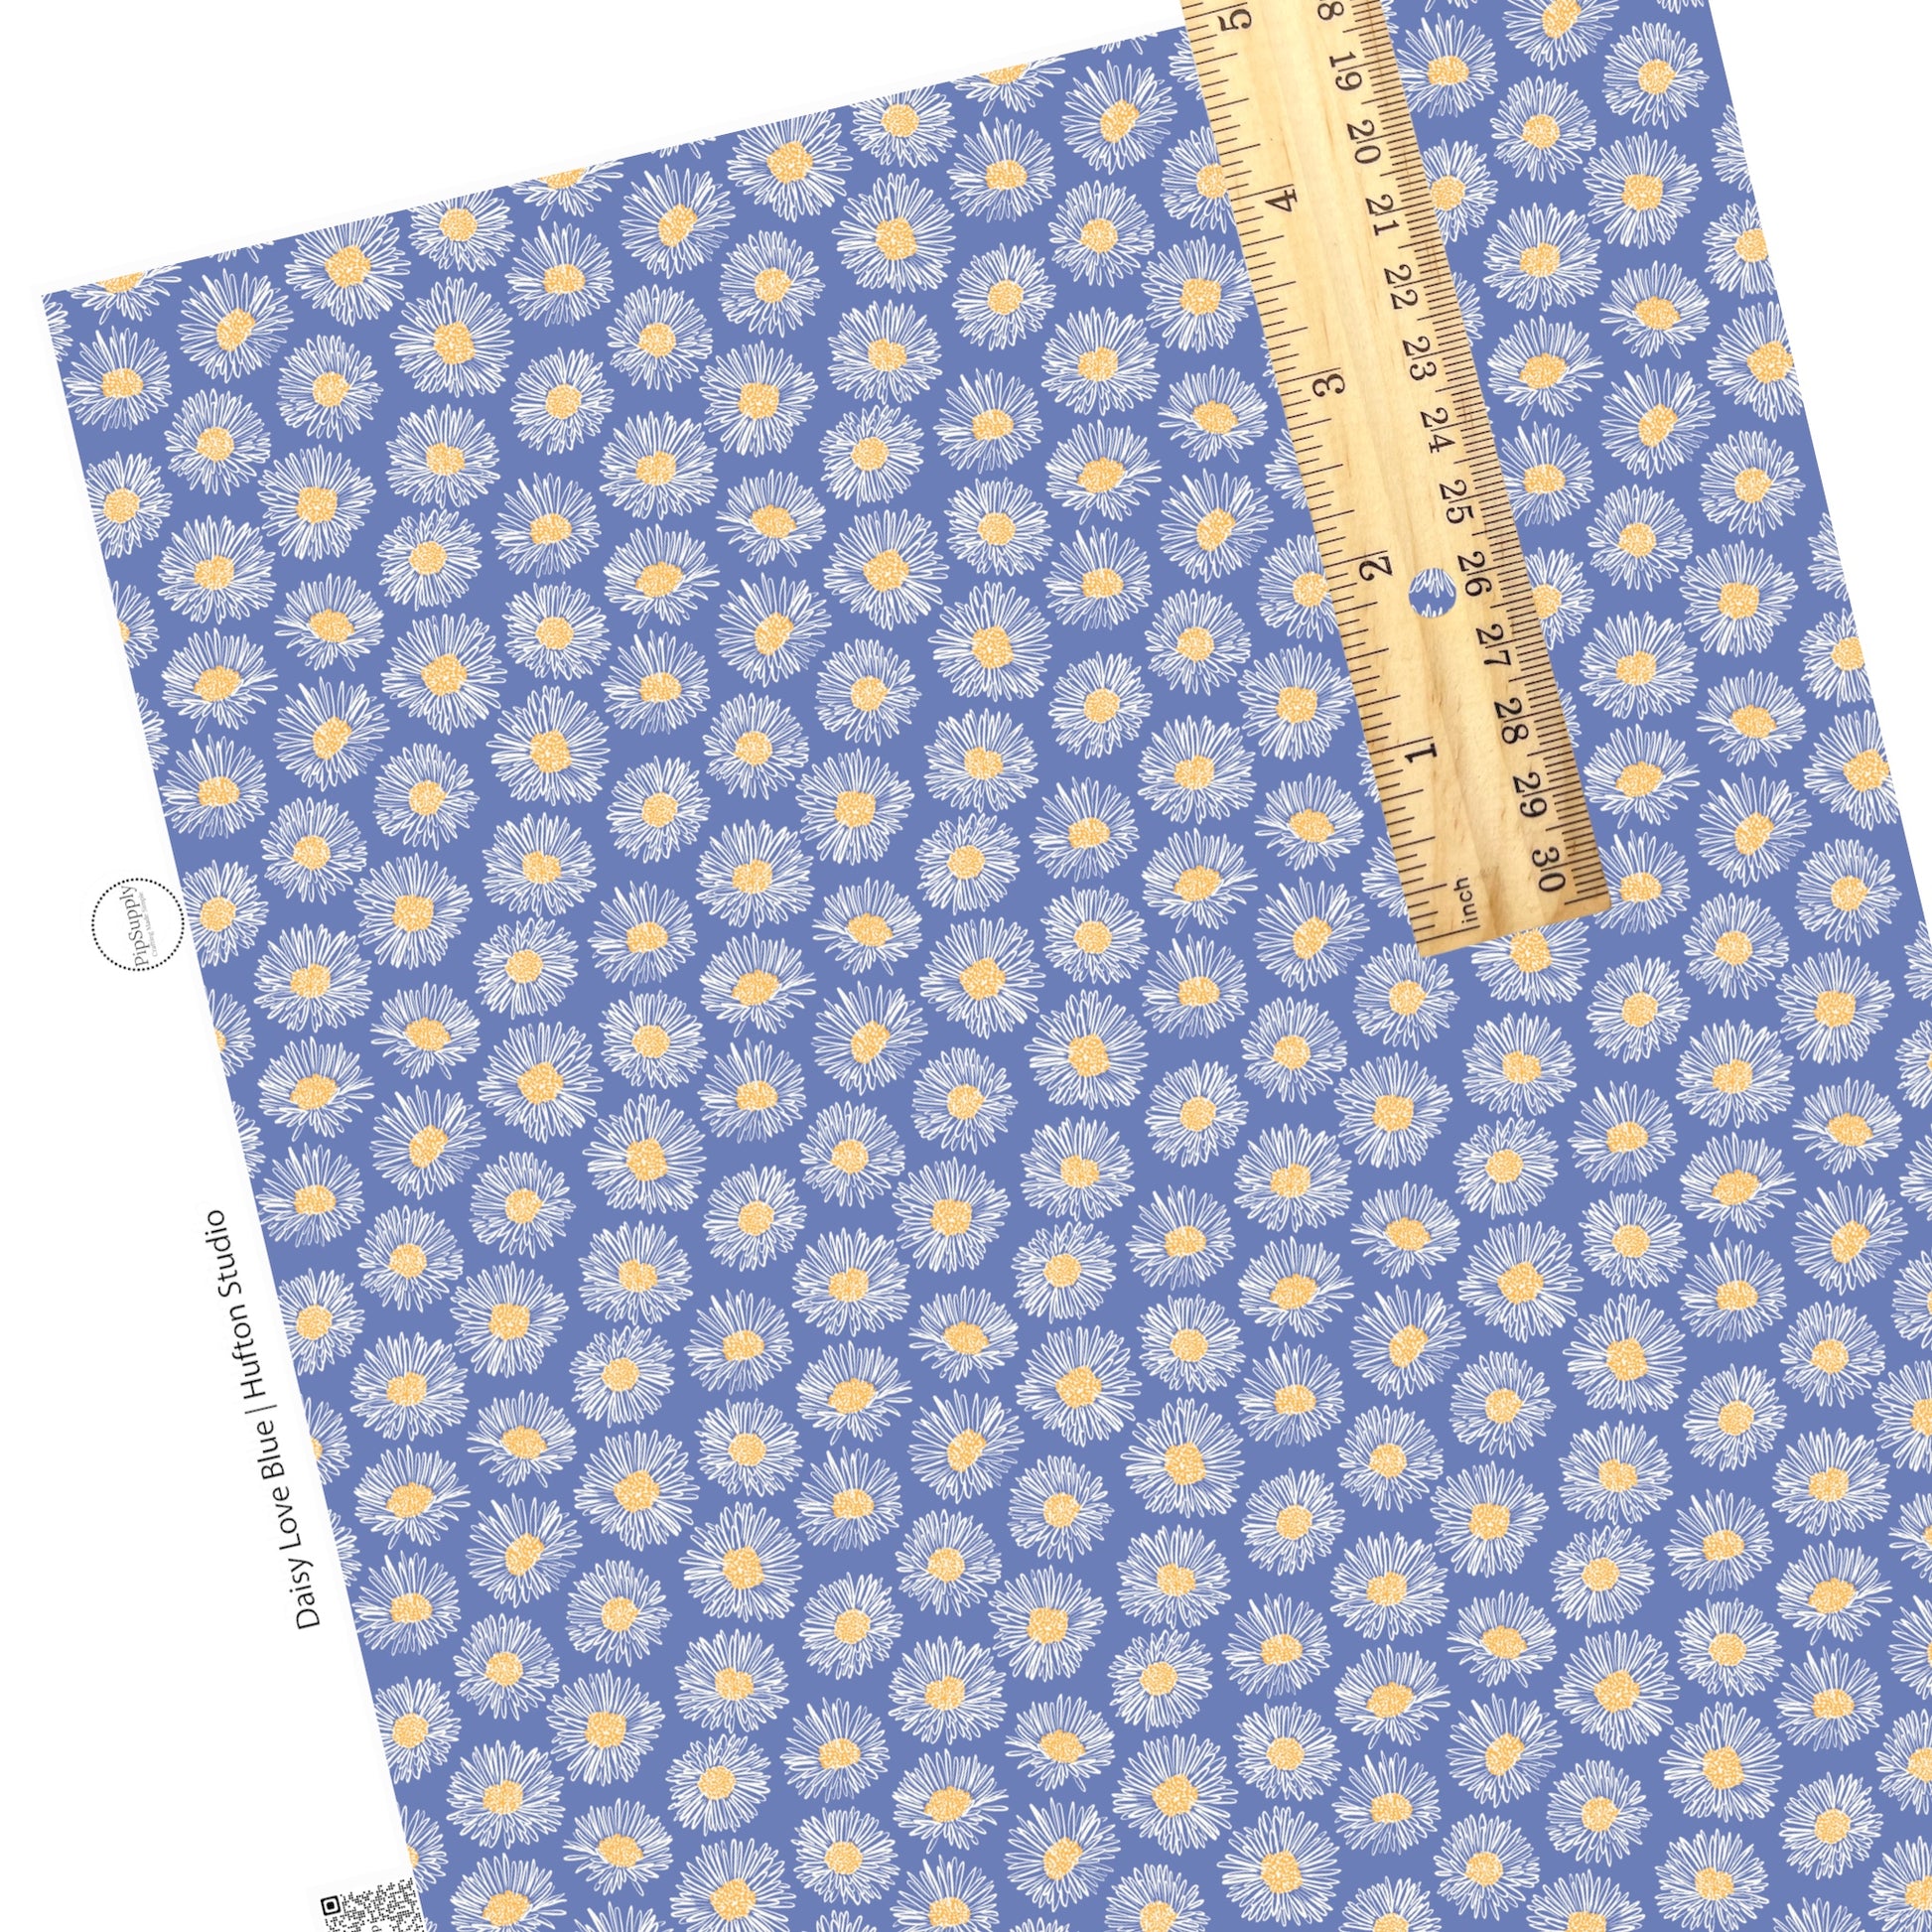 White daisies with yellow center on blue faux leather sheet